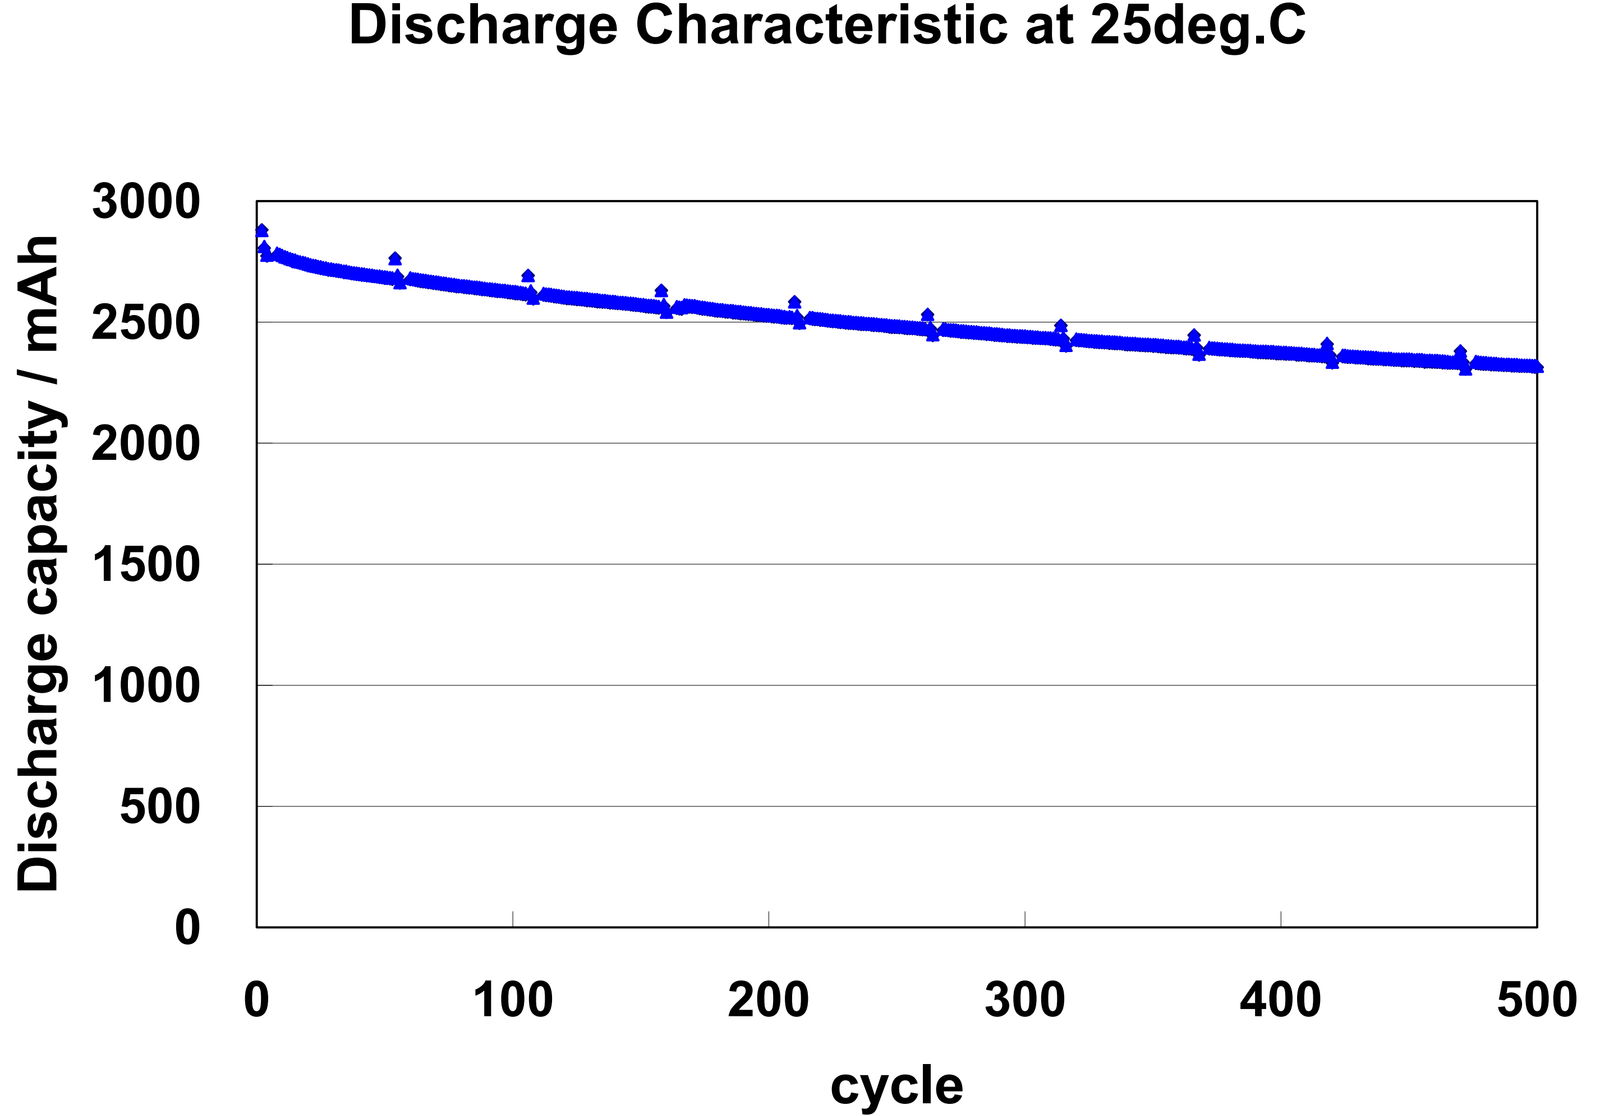 Discharge Characteristic at 25deg.C